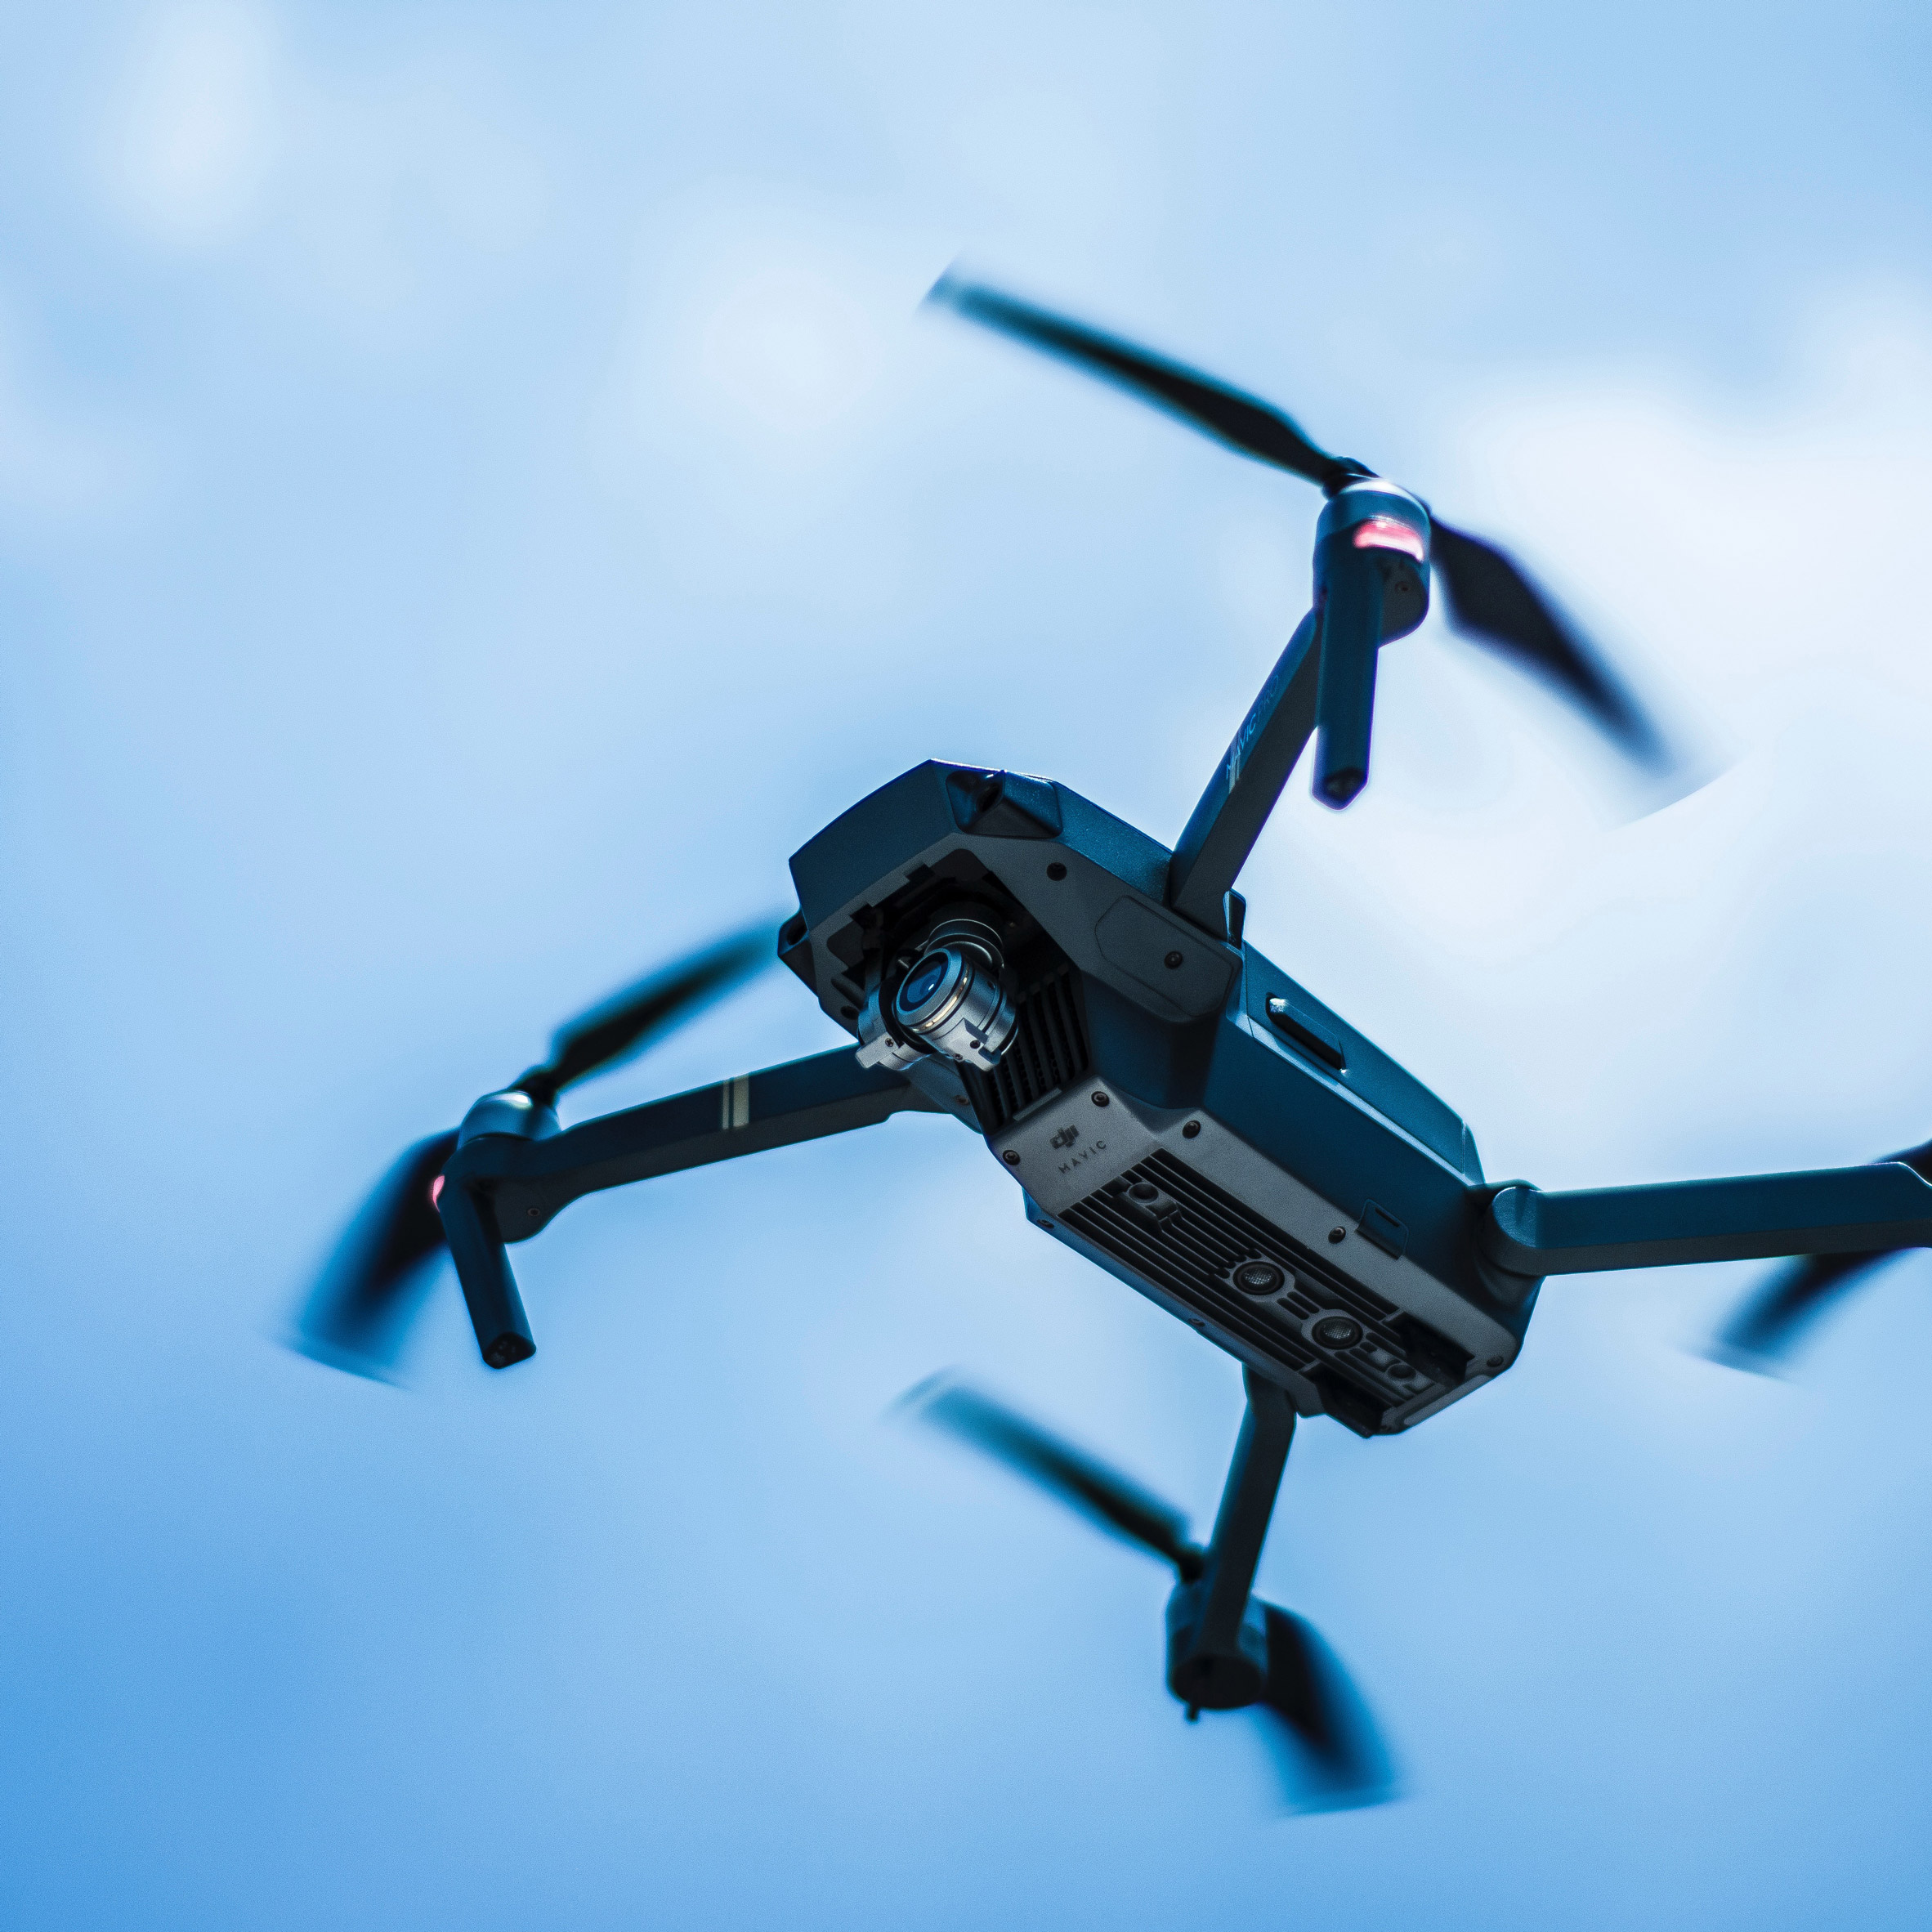 10 ways drones are changing the world